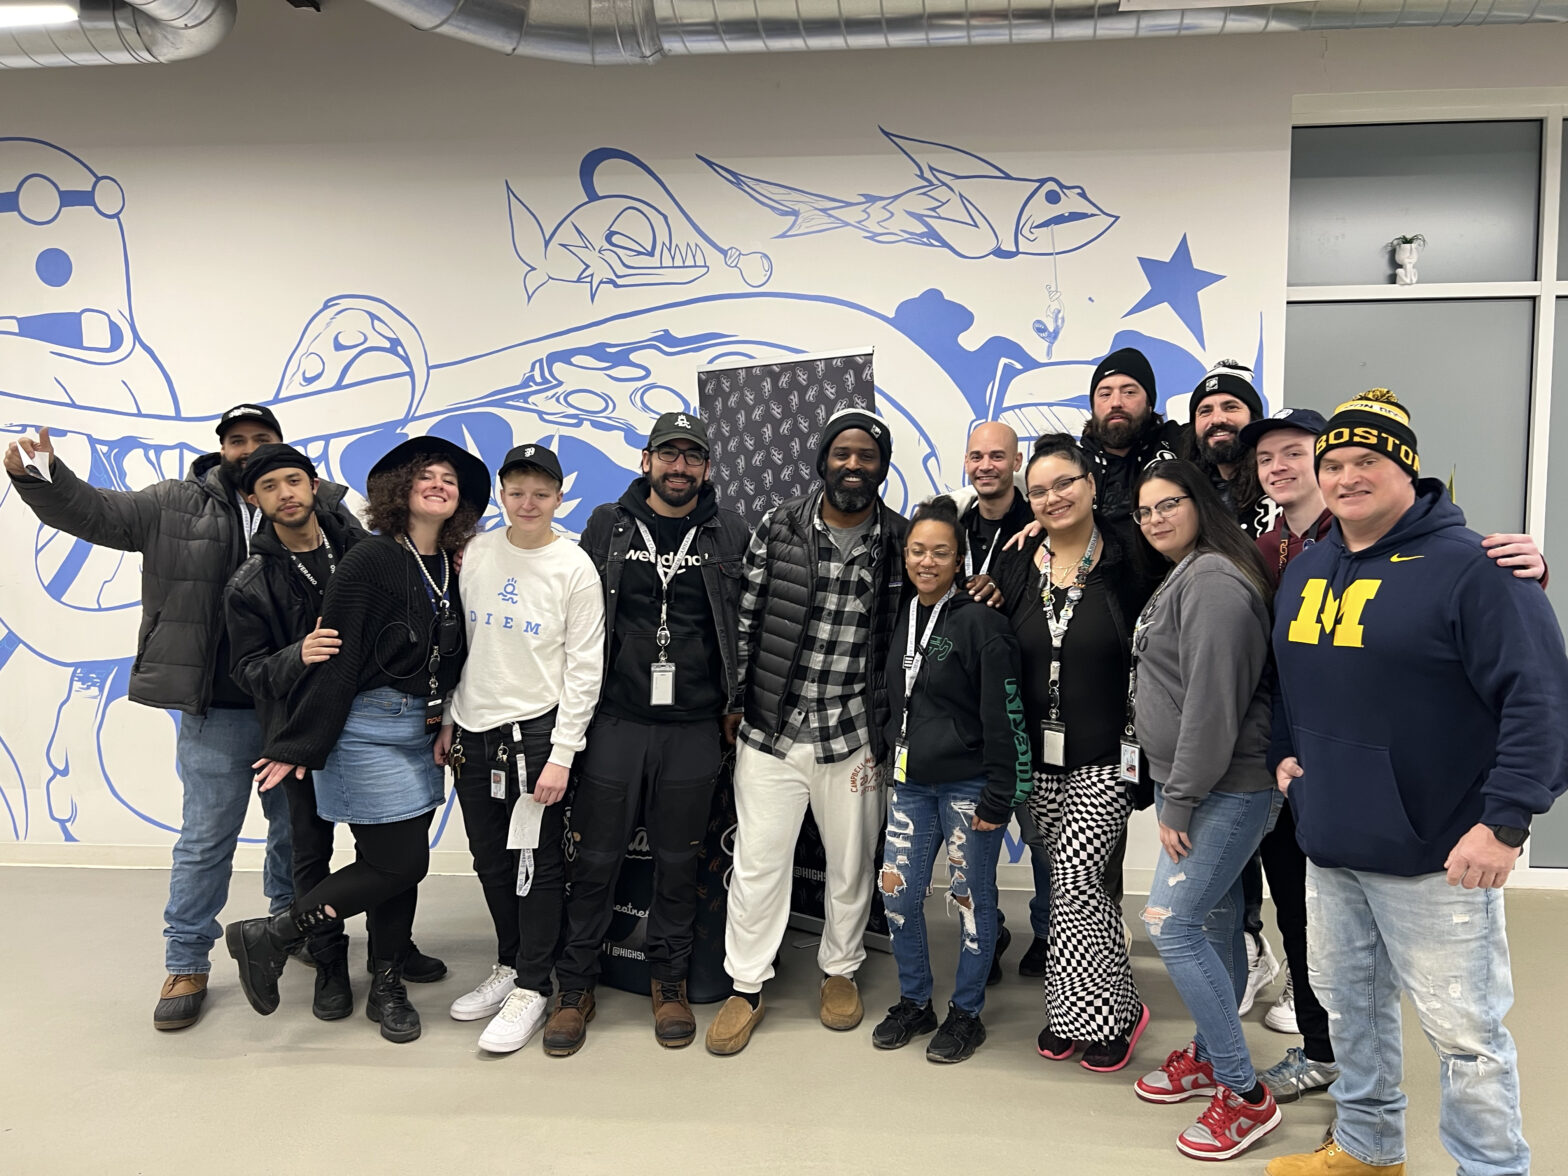 Ricky Williams poses with the Diem Cannabis team in Worcester, MA in January.